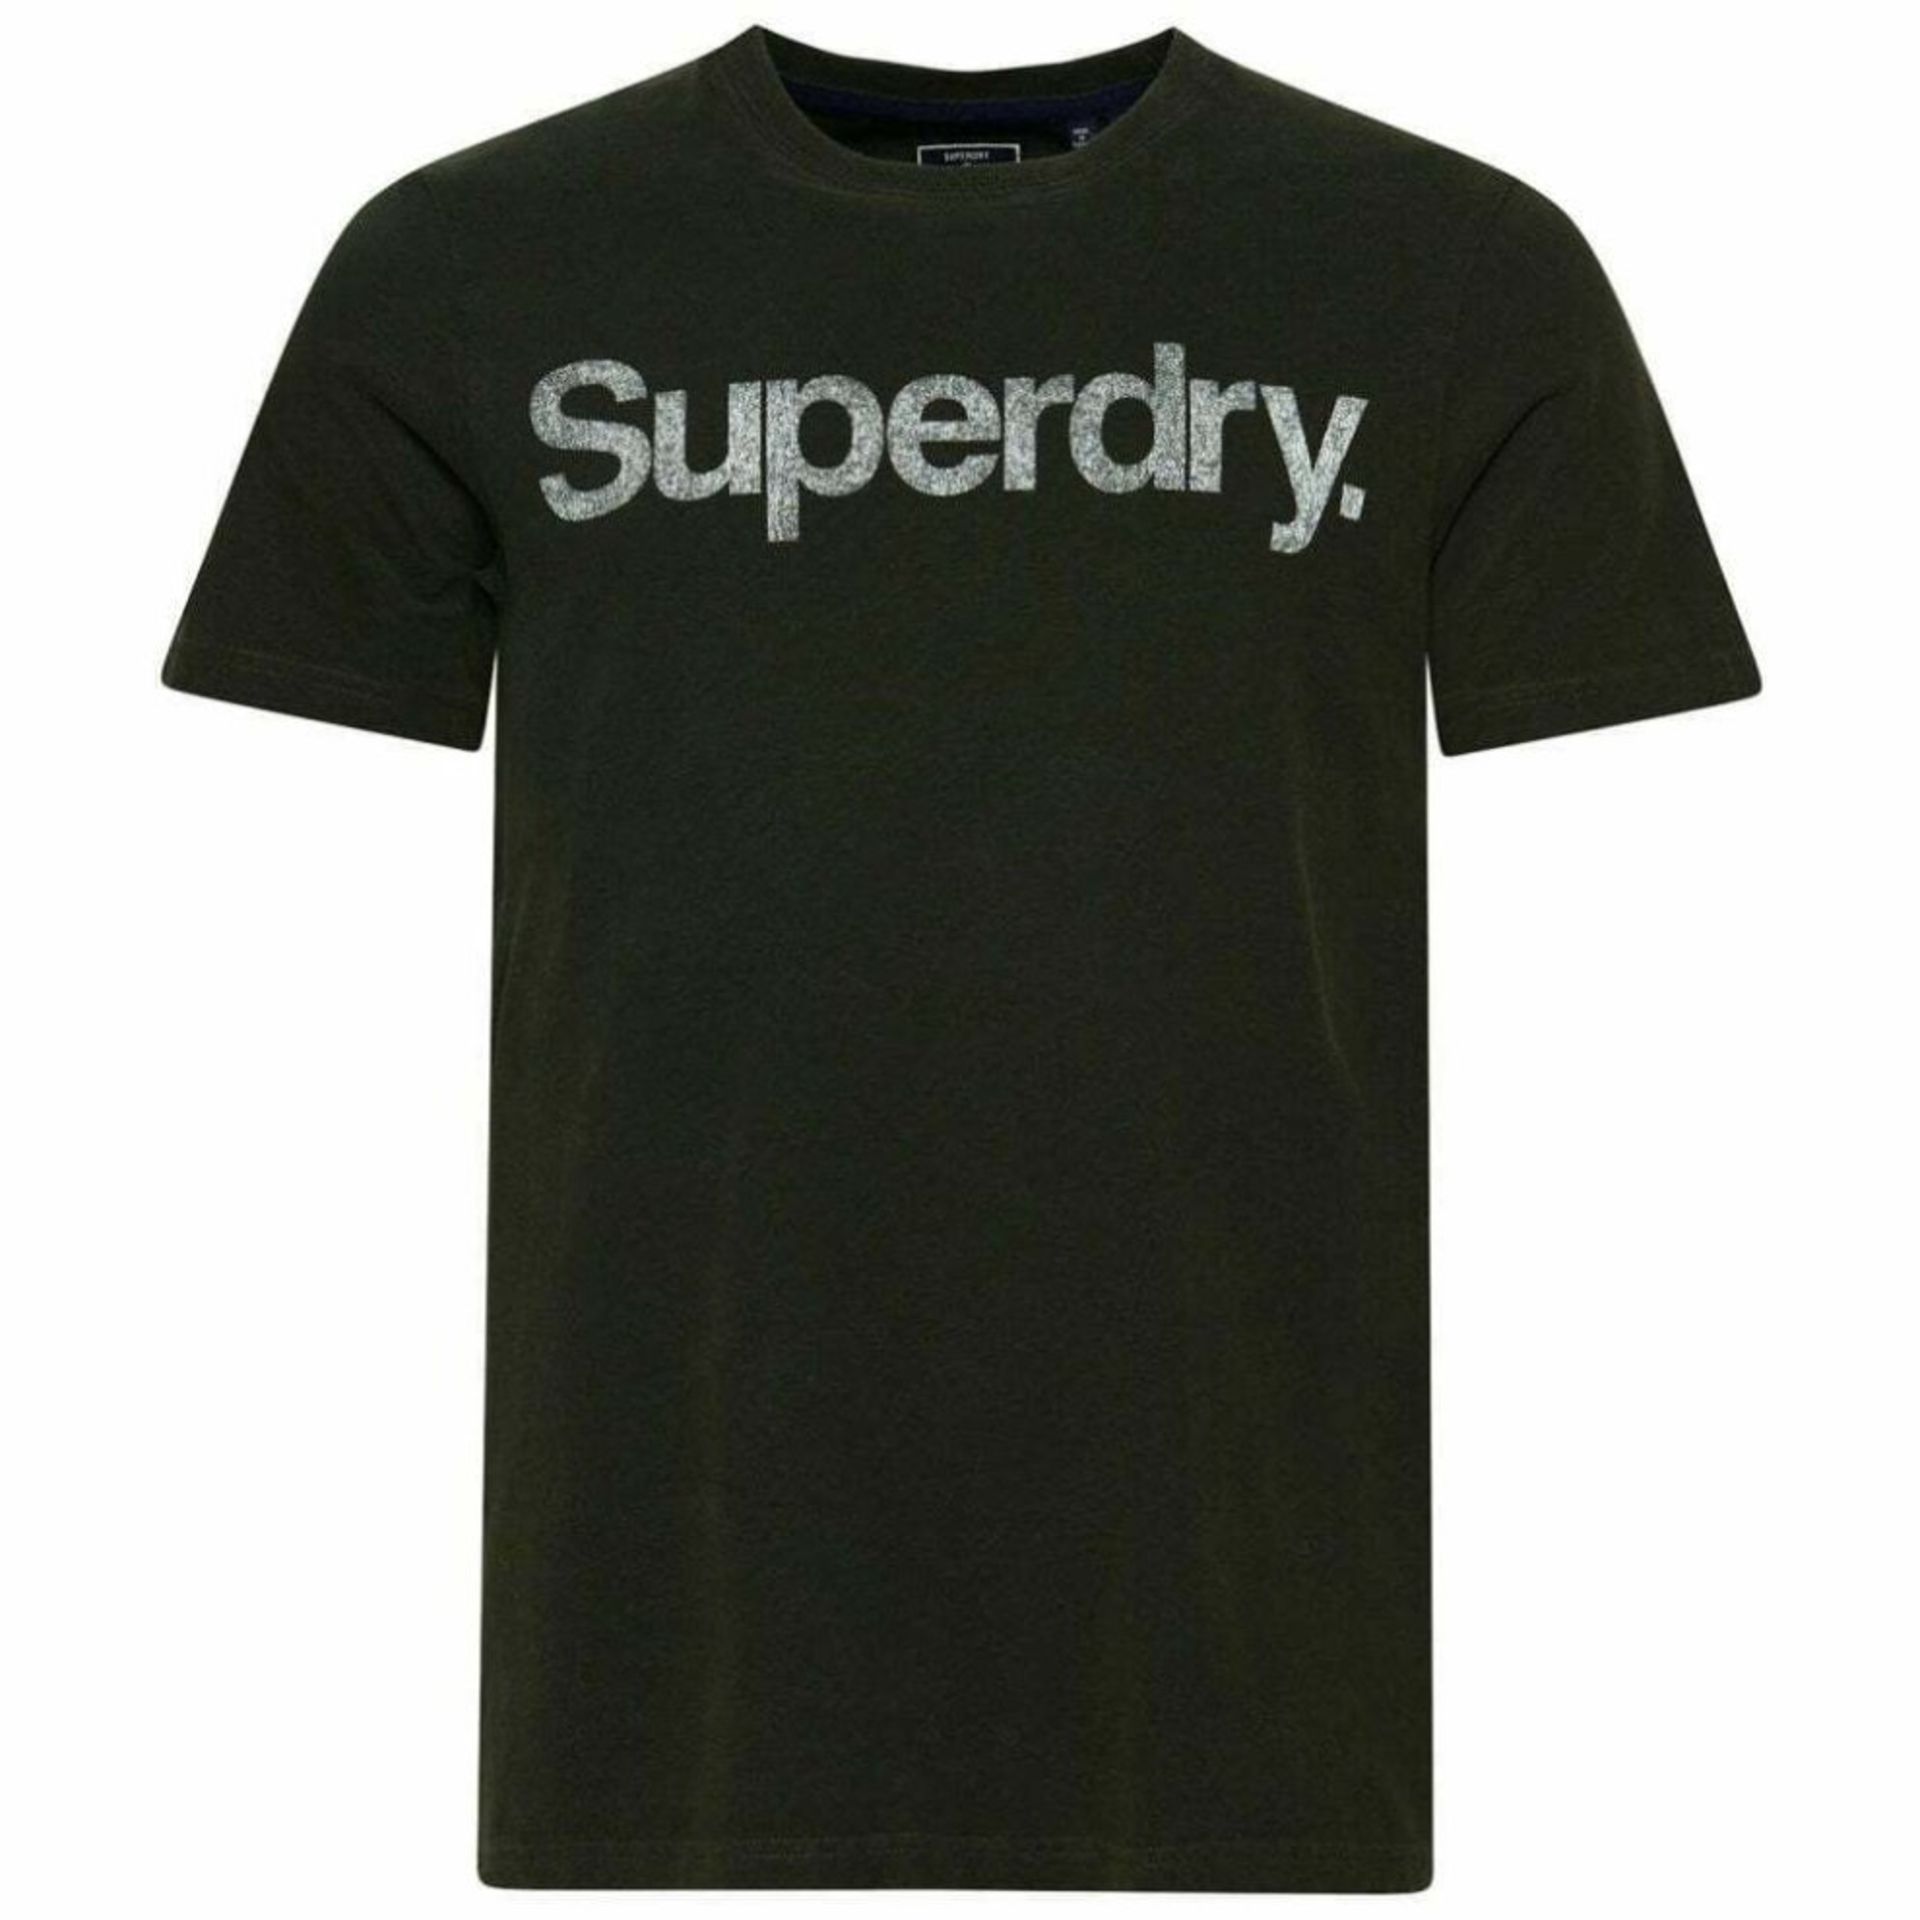 11 PIECE CLOTHING LOT IE 5 X BRAND NEW SUPERDRY SWEATSHIRTS/ JUMPERS IN OLIVE GREEN ( 3XL-2 , 2XL-